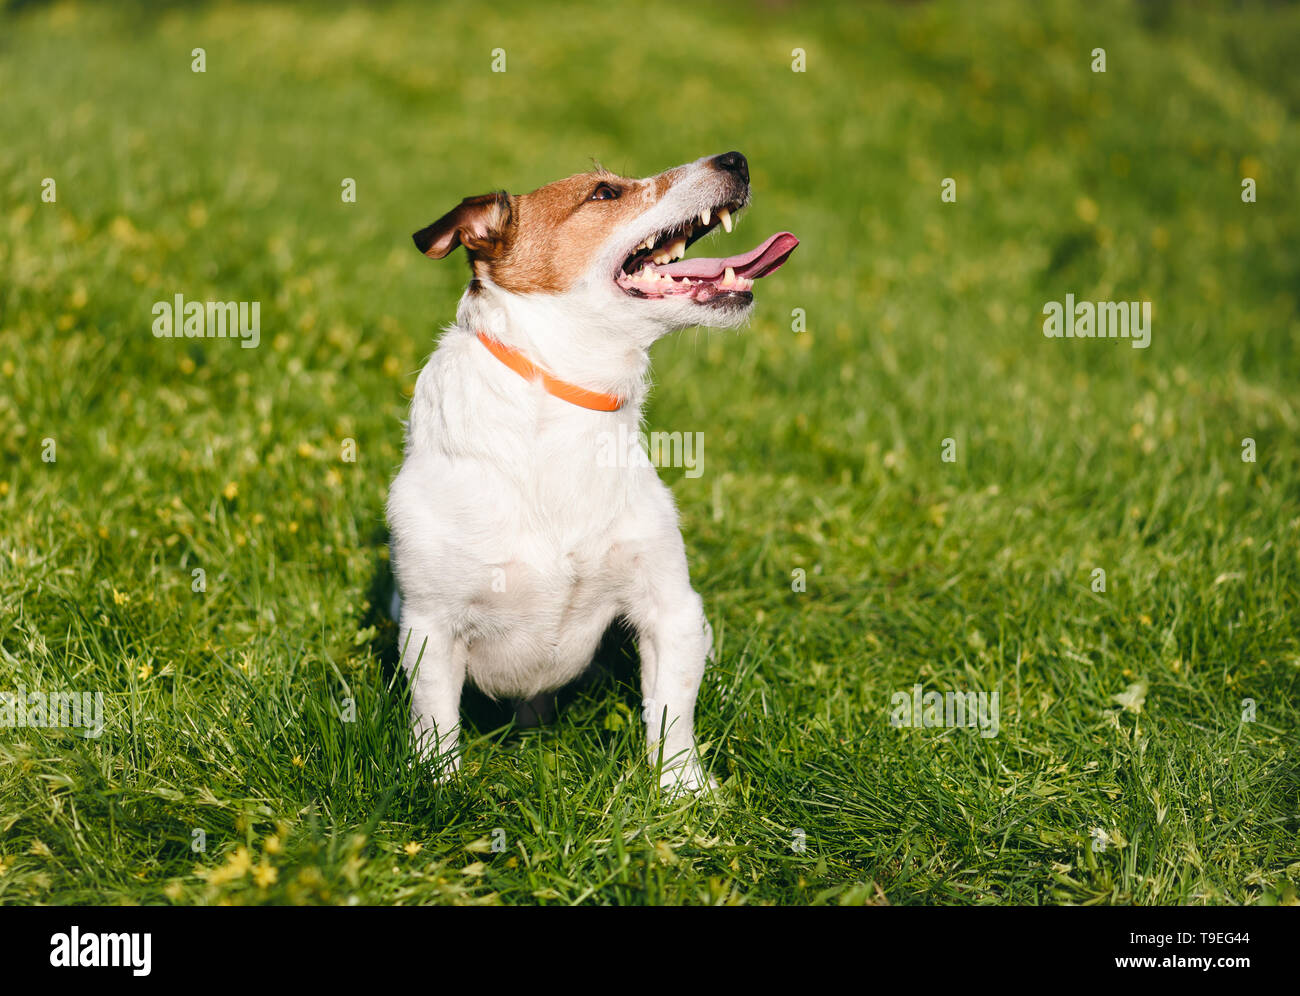 Happy dog safely playing on green grass wearing anti flea and tick collar during spring season Stock Photo